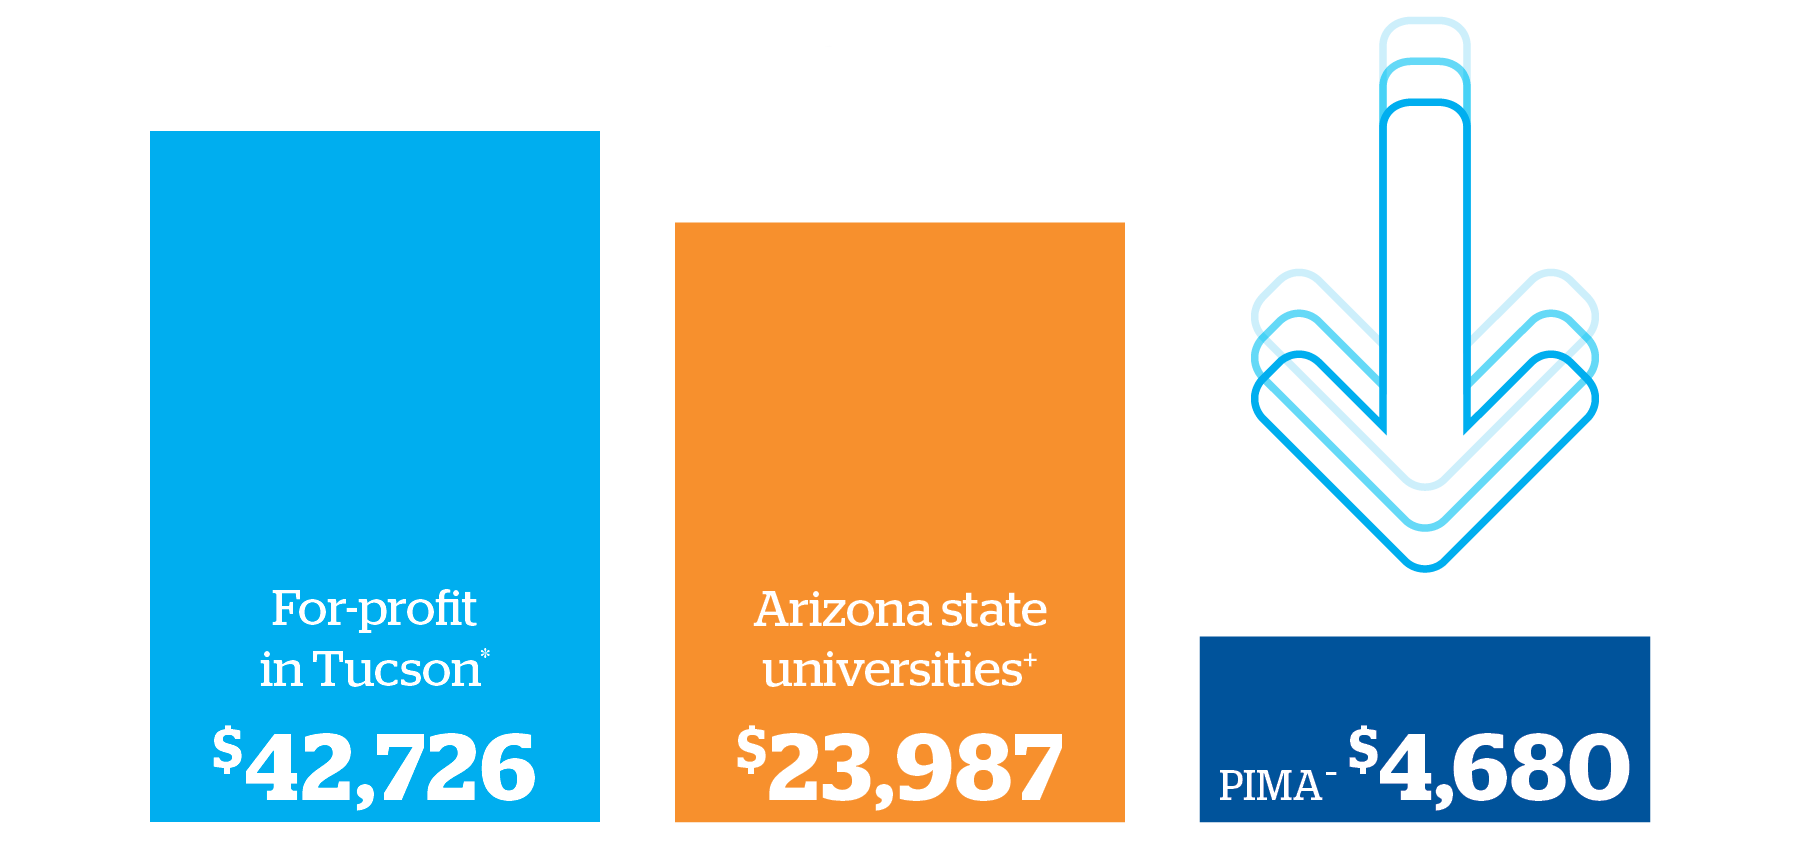 A bar graph comparing the 2-year tuition cost between for-profit institutions in Tucson* (42,7226), Arizona state universities* ($23,987) and Pima ($4,680)